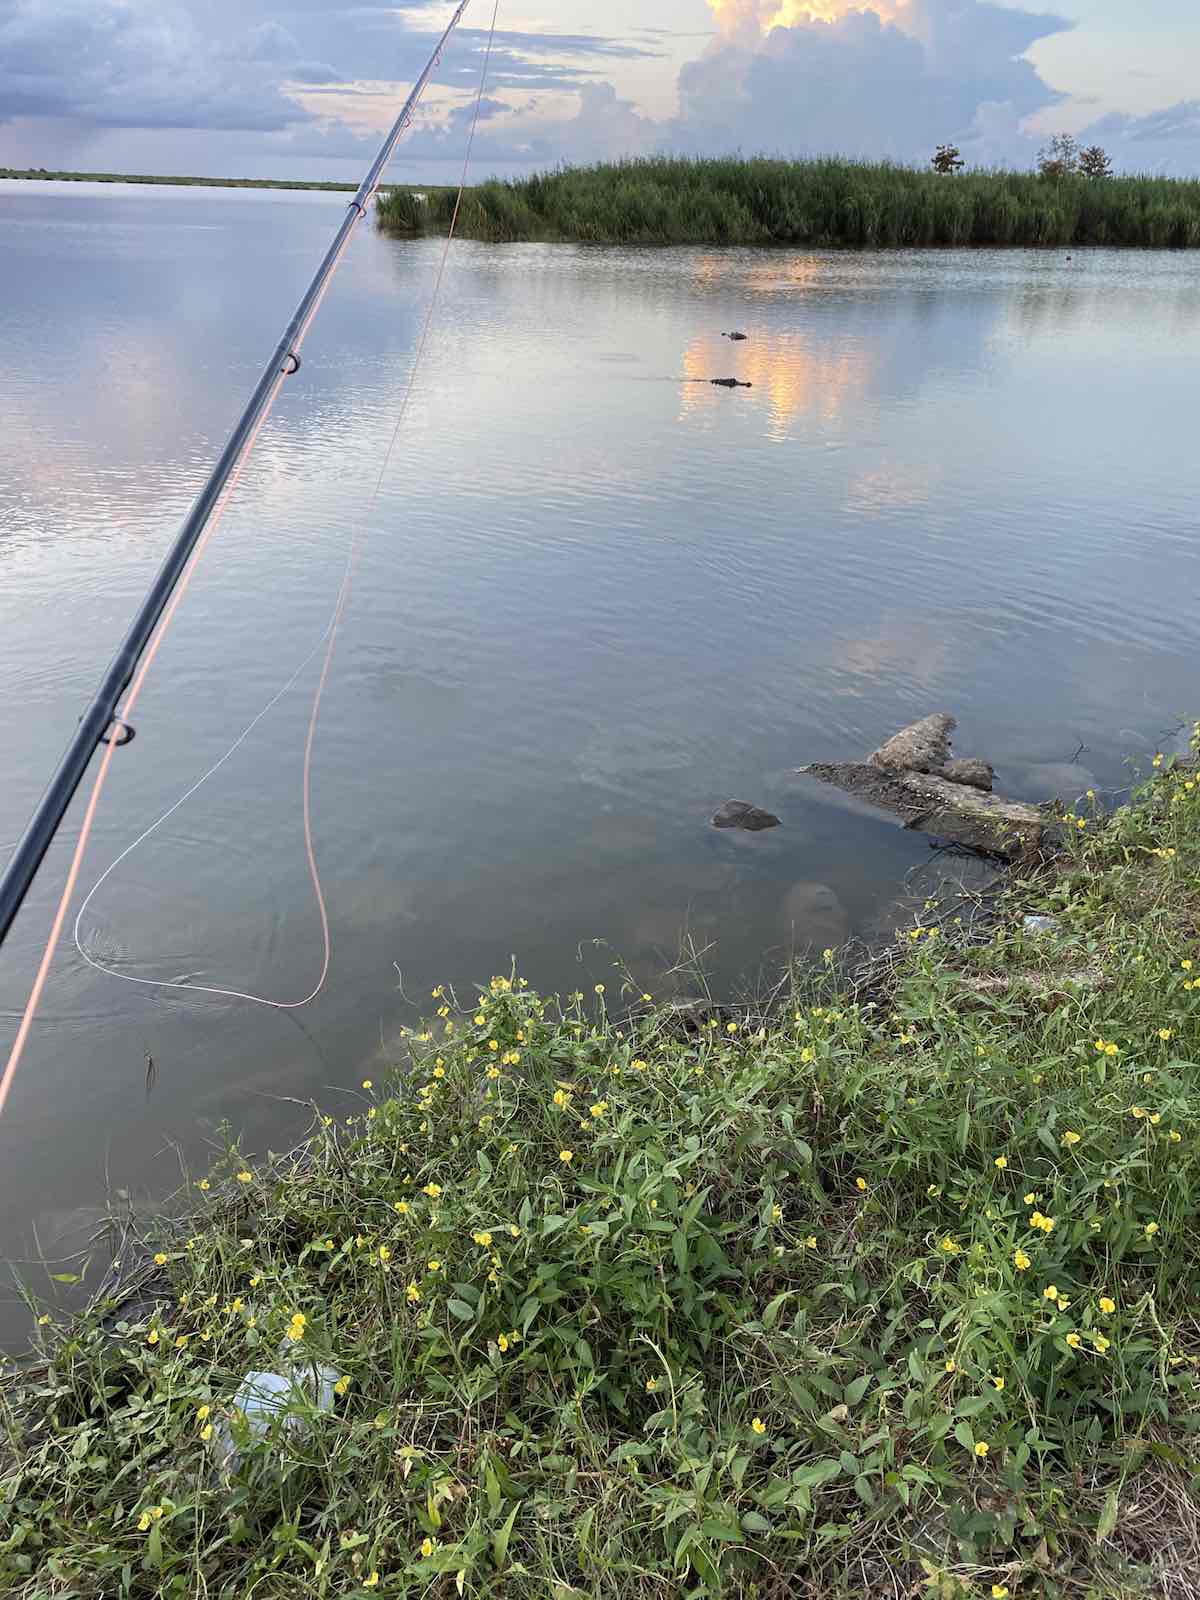 Fly fishing from shore in Louisiana while being watched by alligators